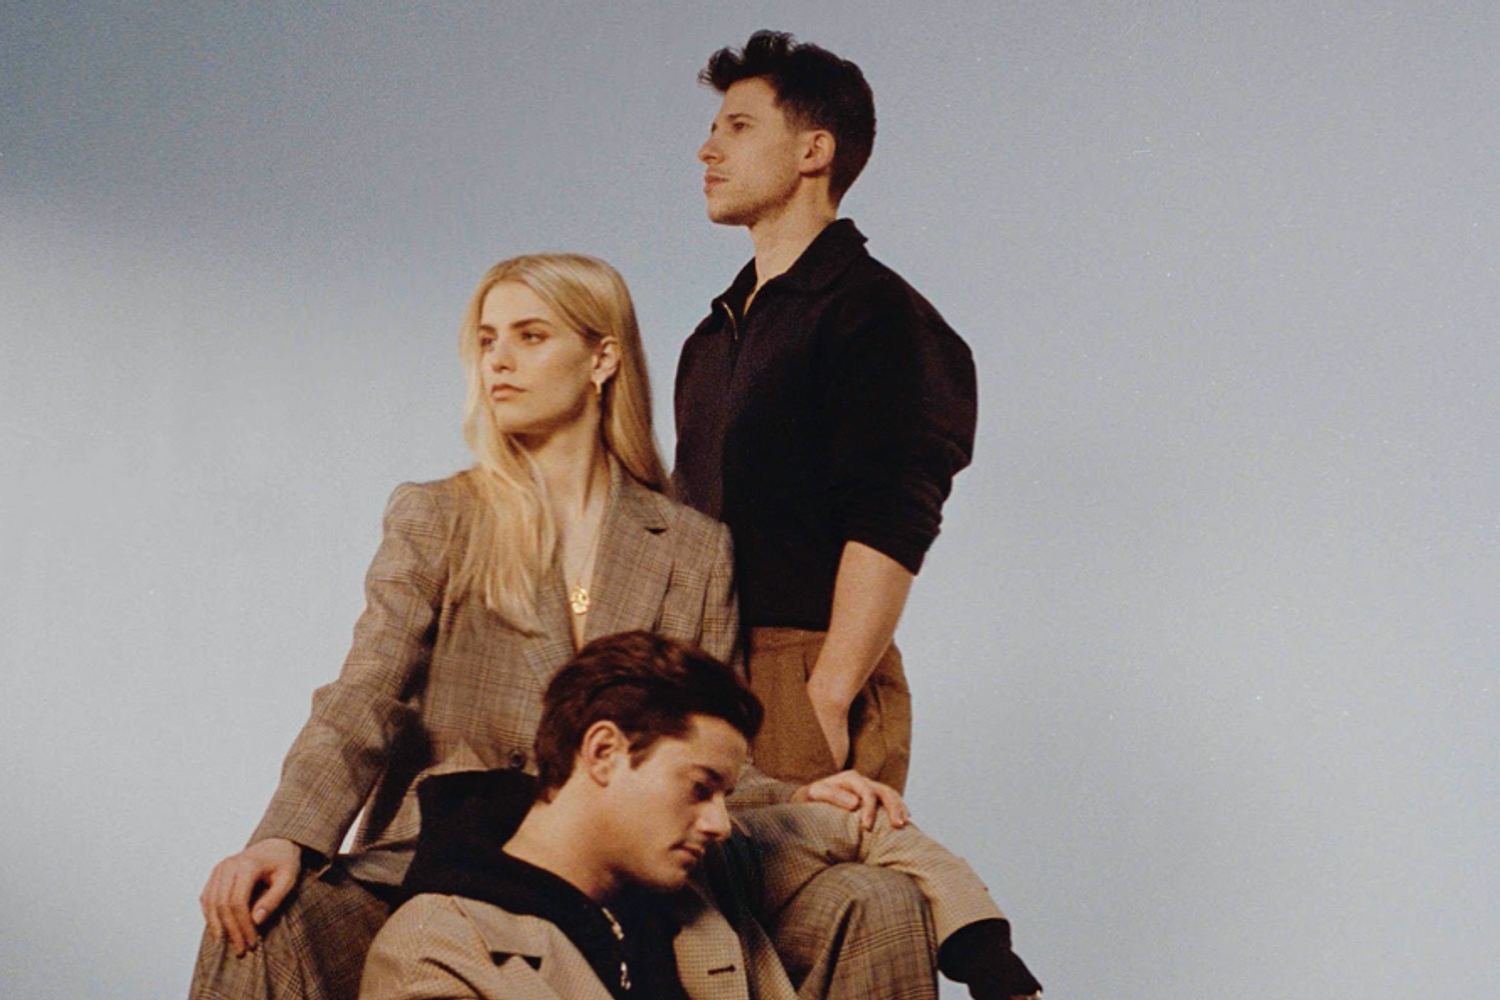 London Grammar return with ‘Baby It’s You’